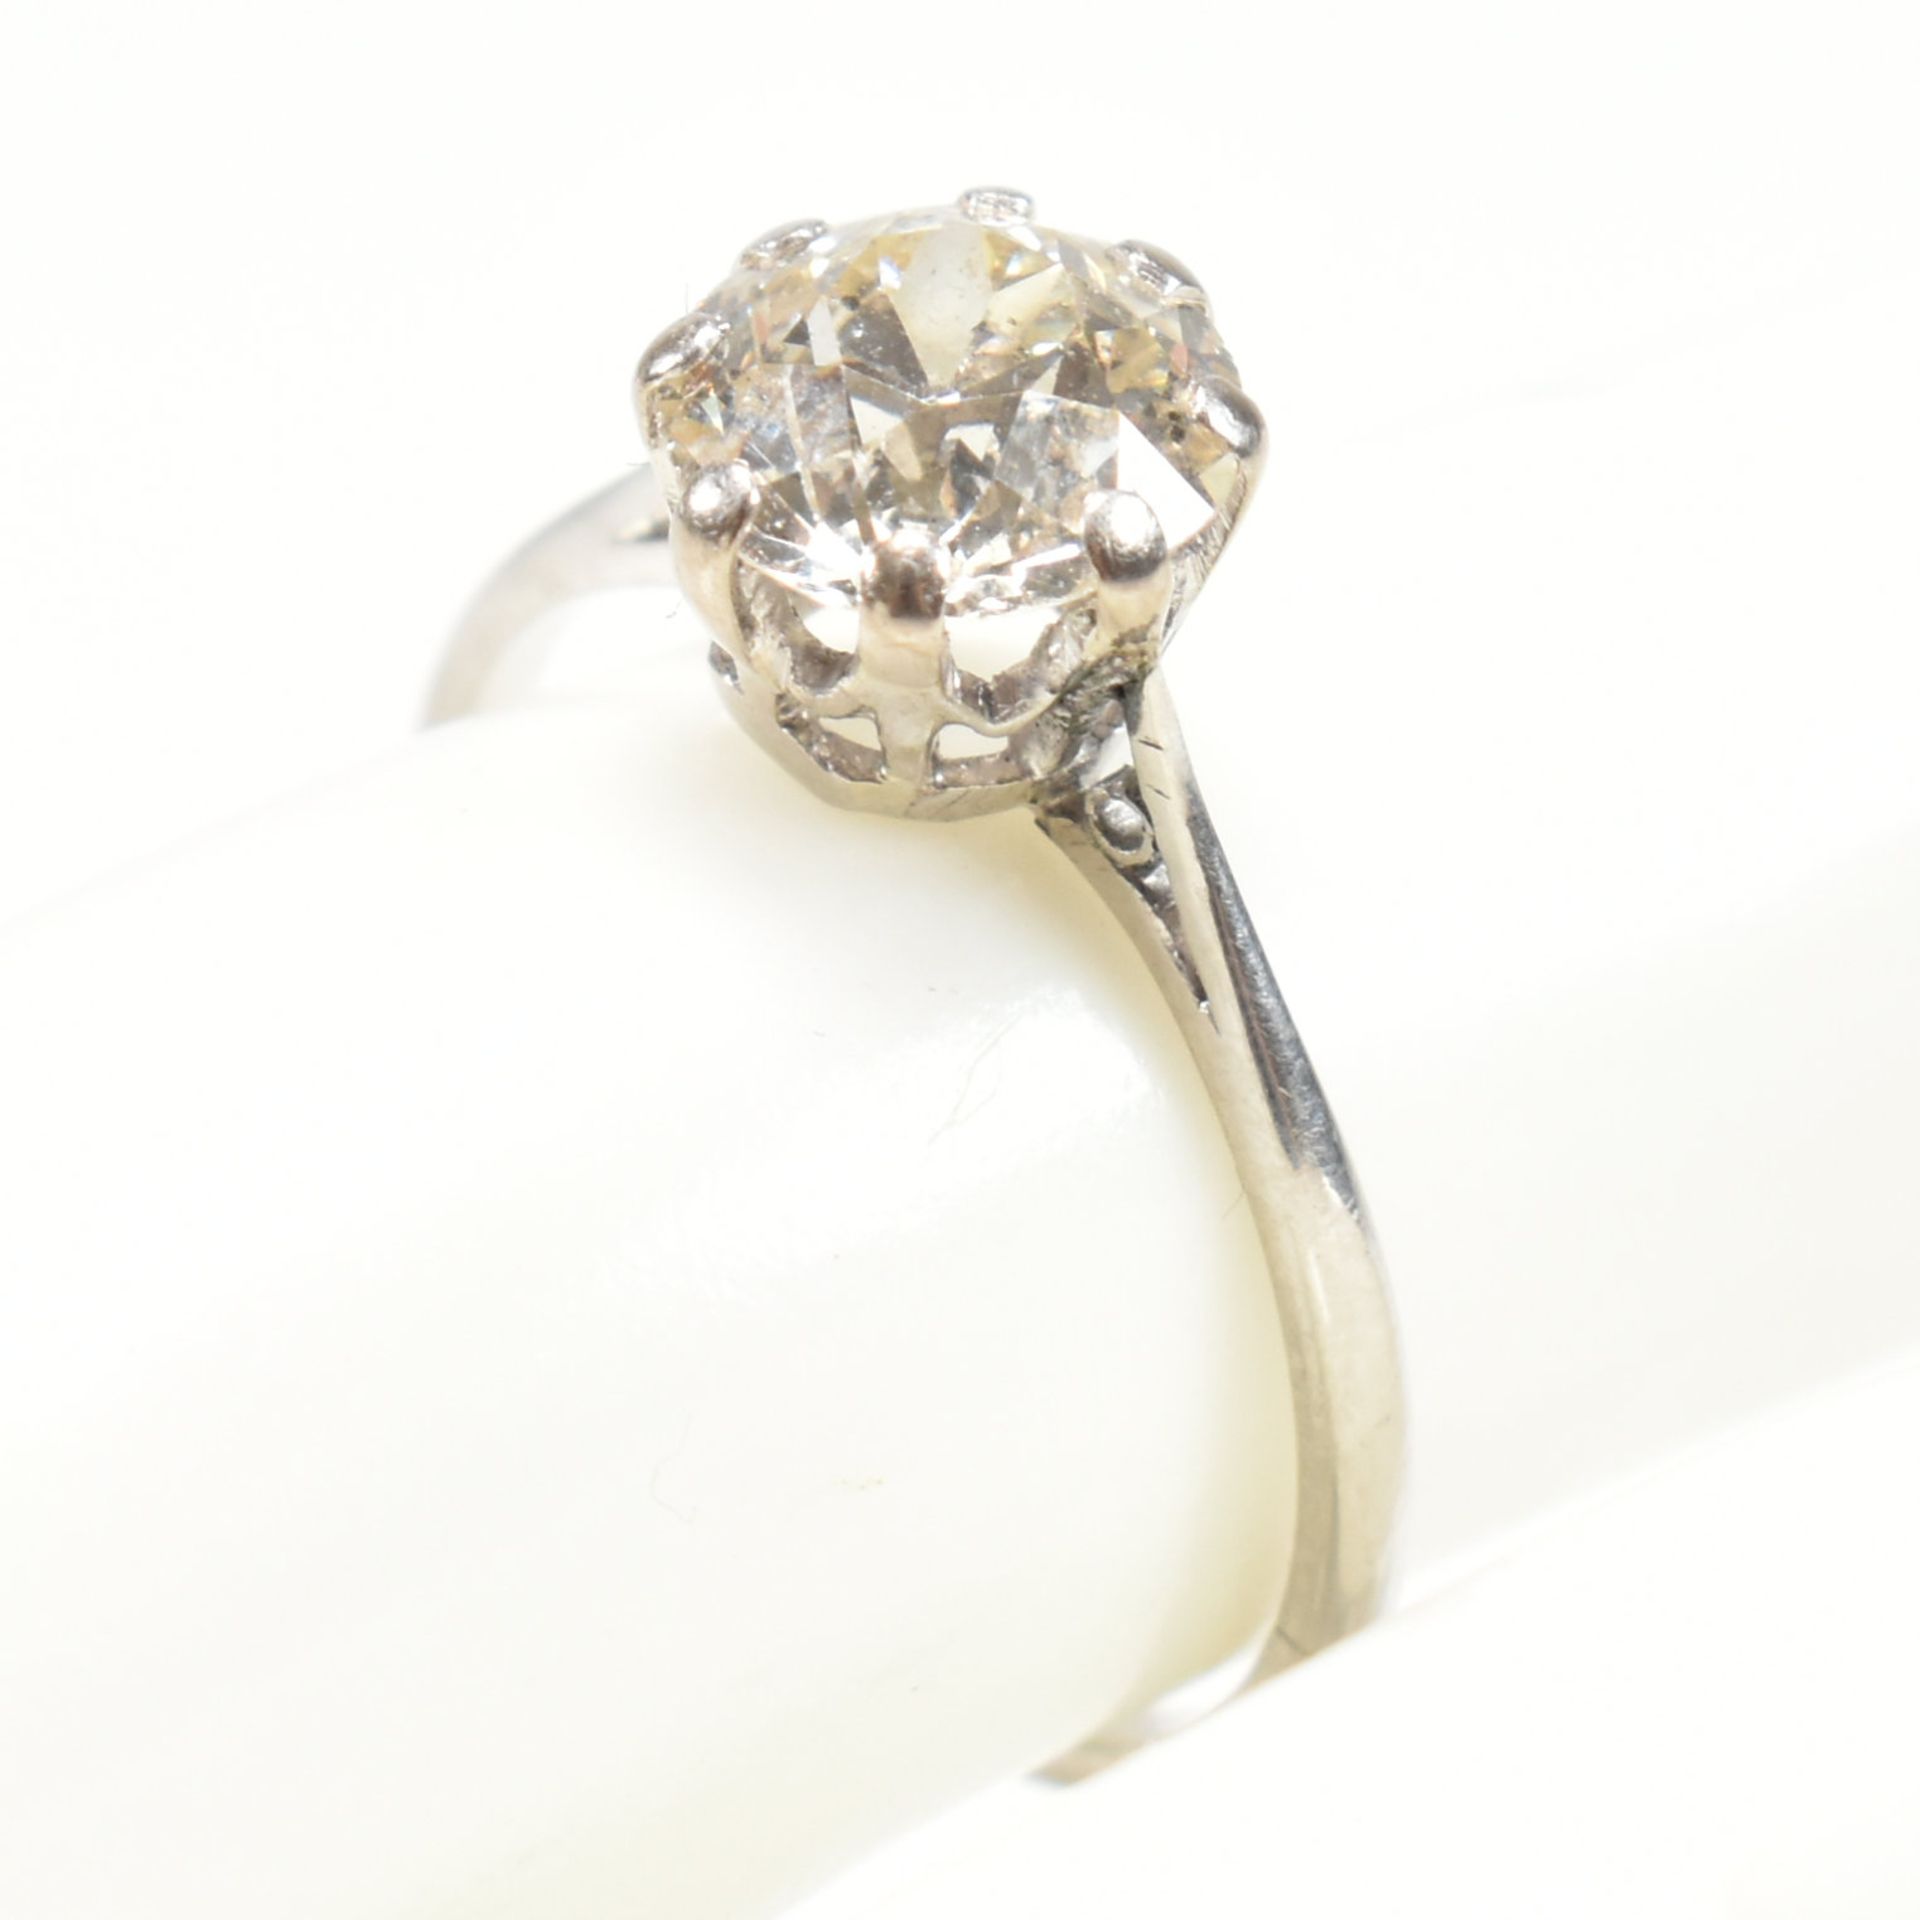 1930S 1.7CT DIAMOND SOLITAIRE RING - Image 8 of 9